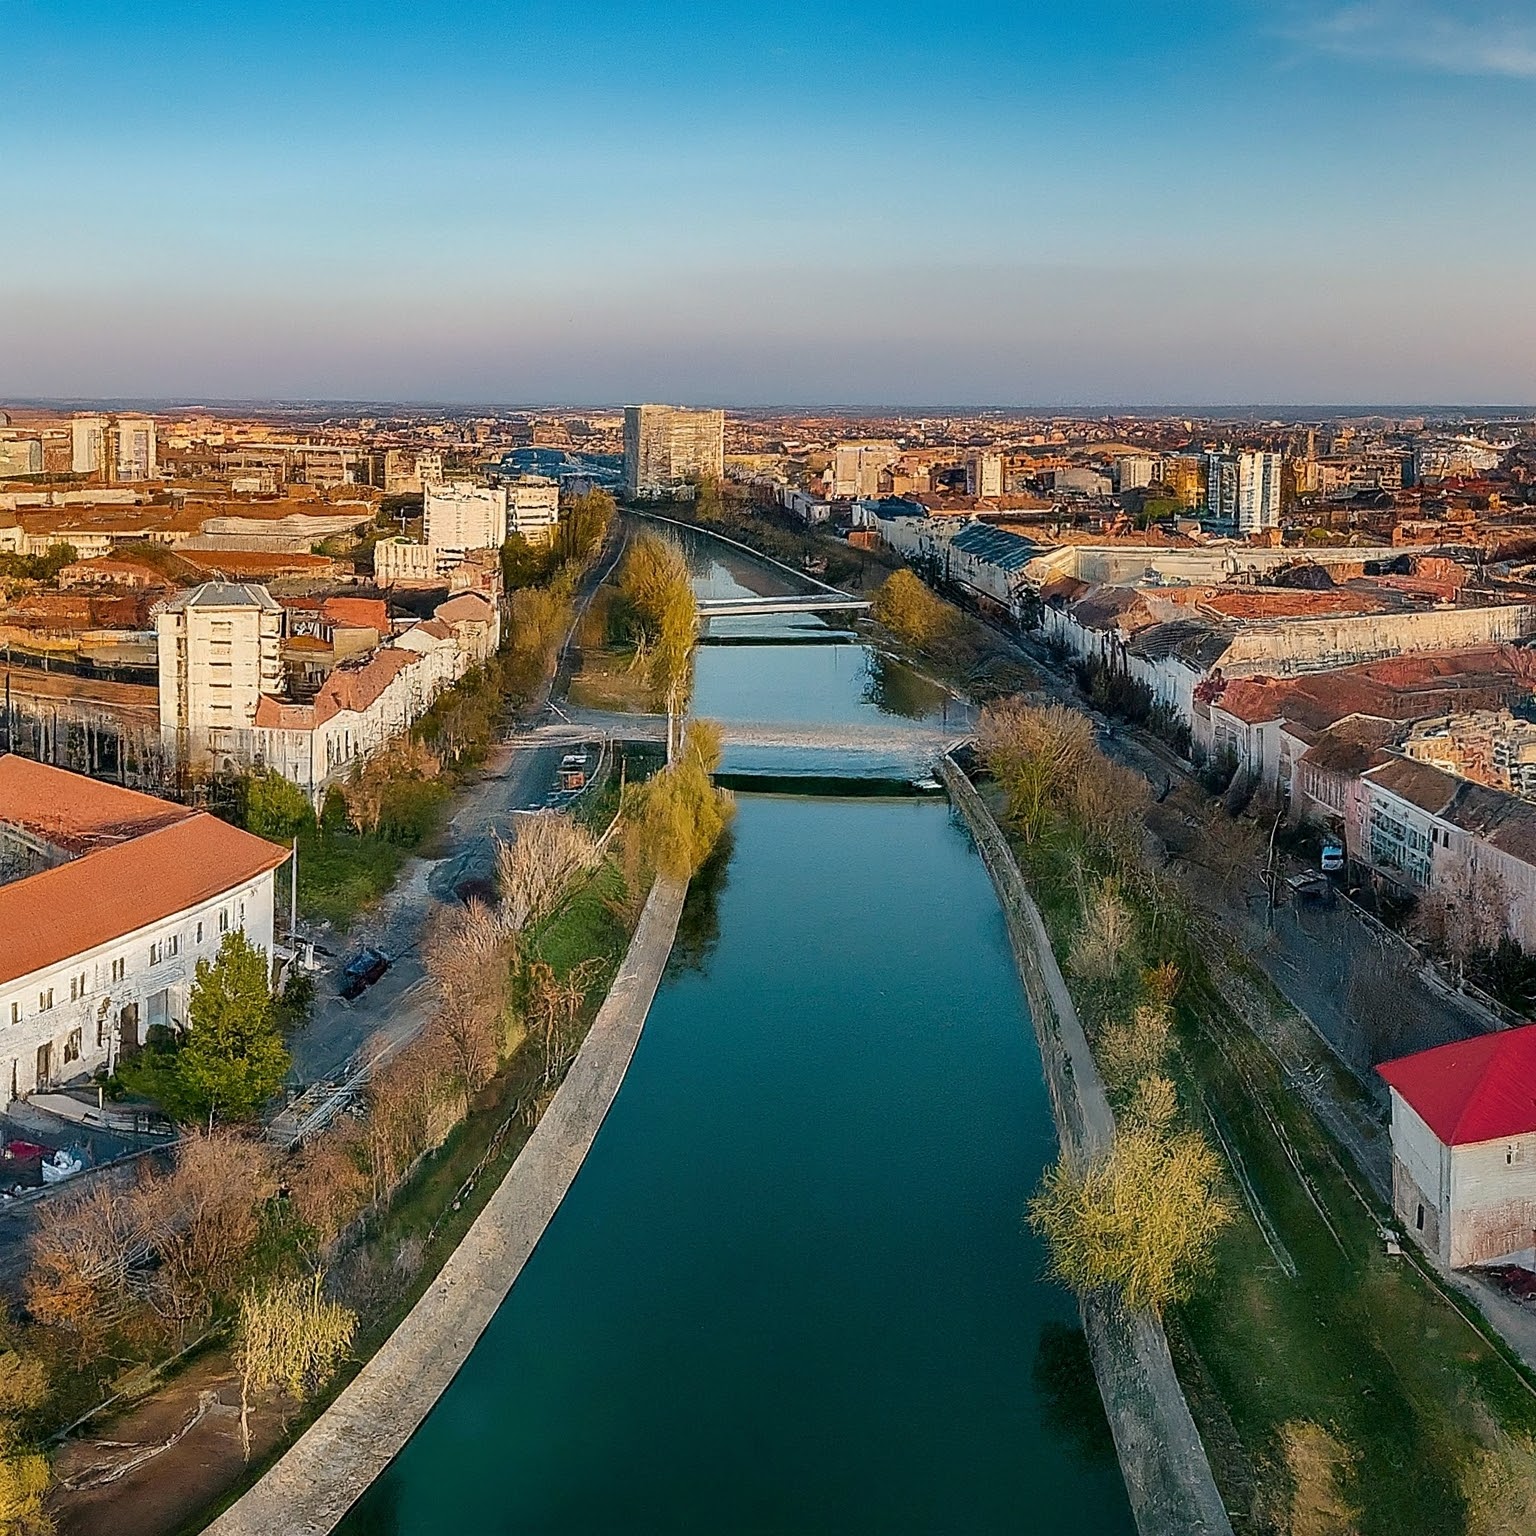 Panoramic view of Timisoara, Romania, with the Bega River winding through the city.